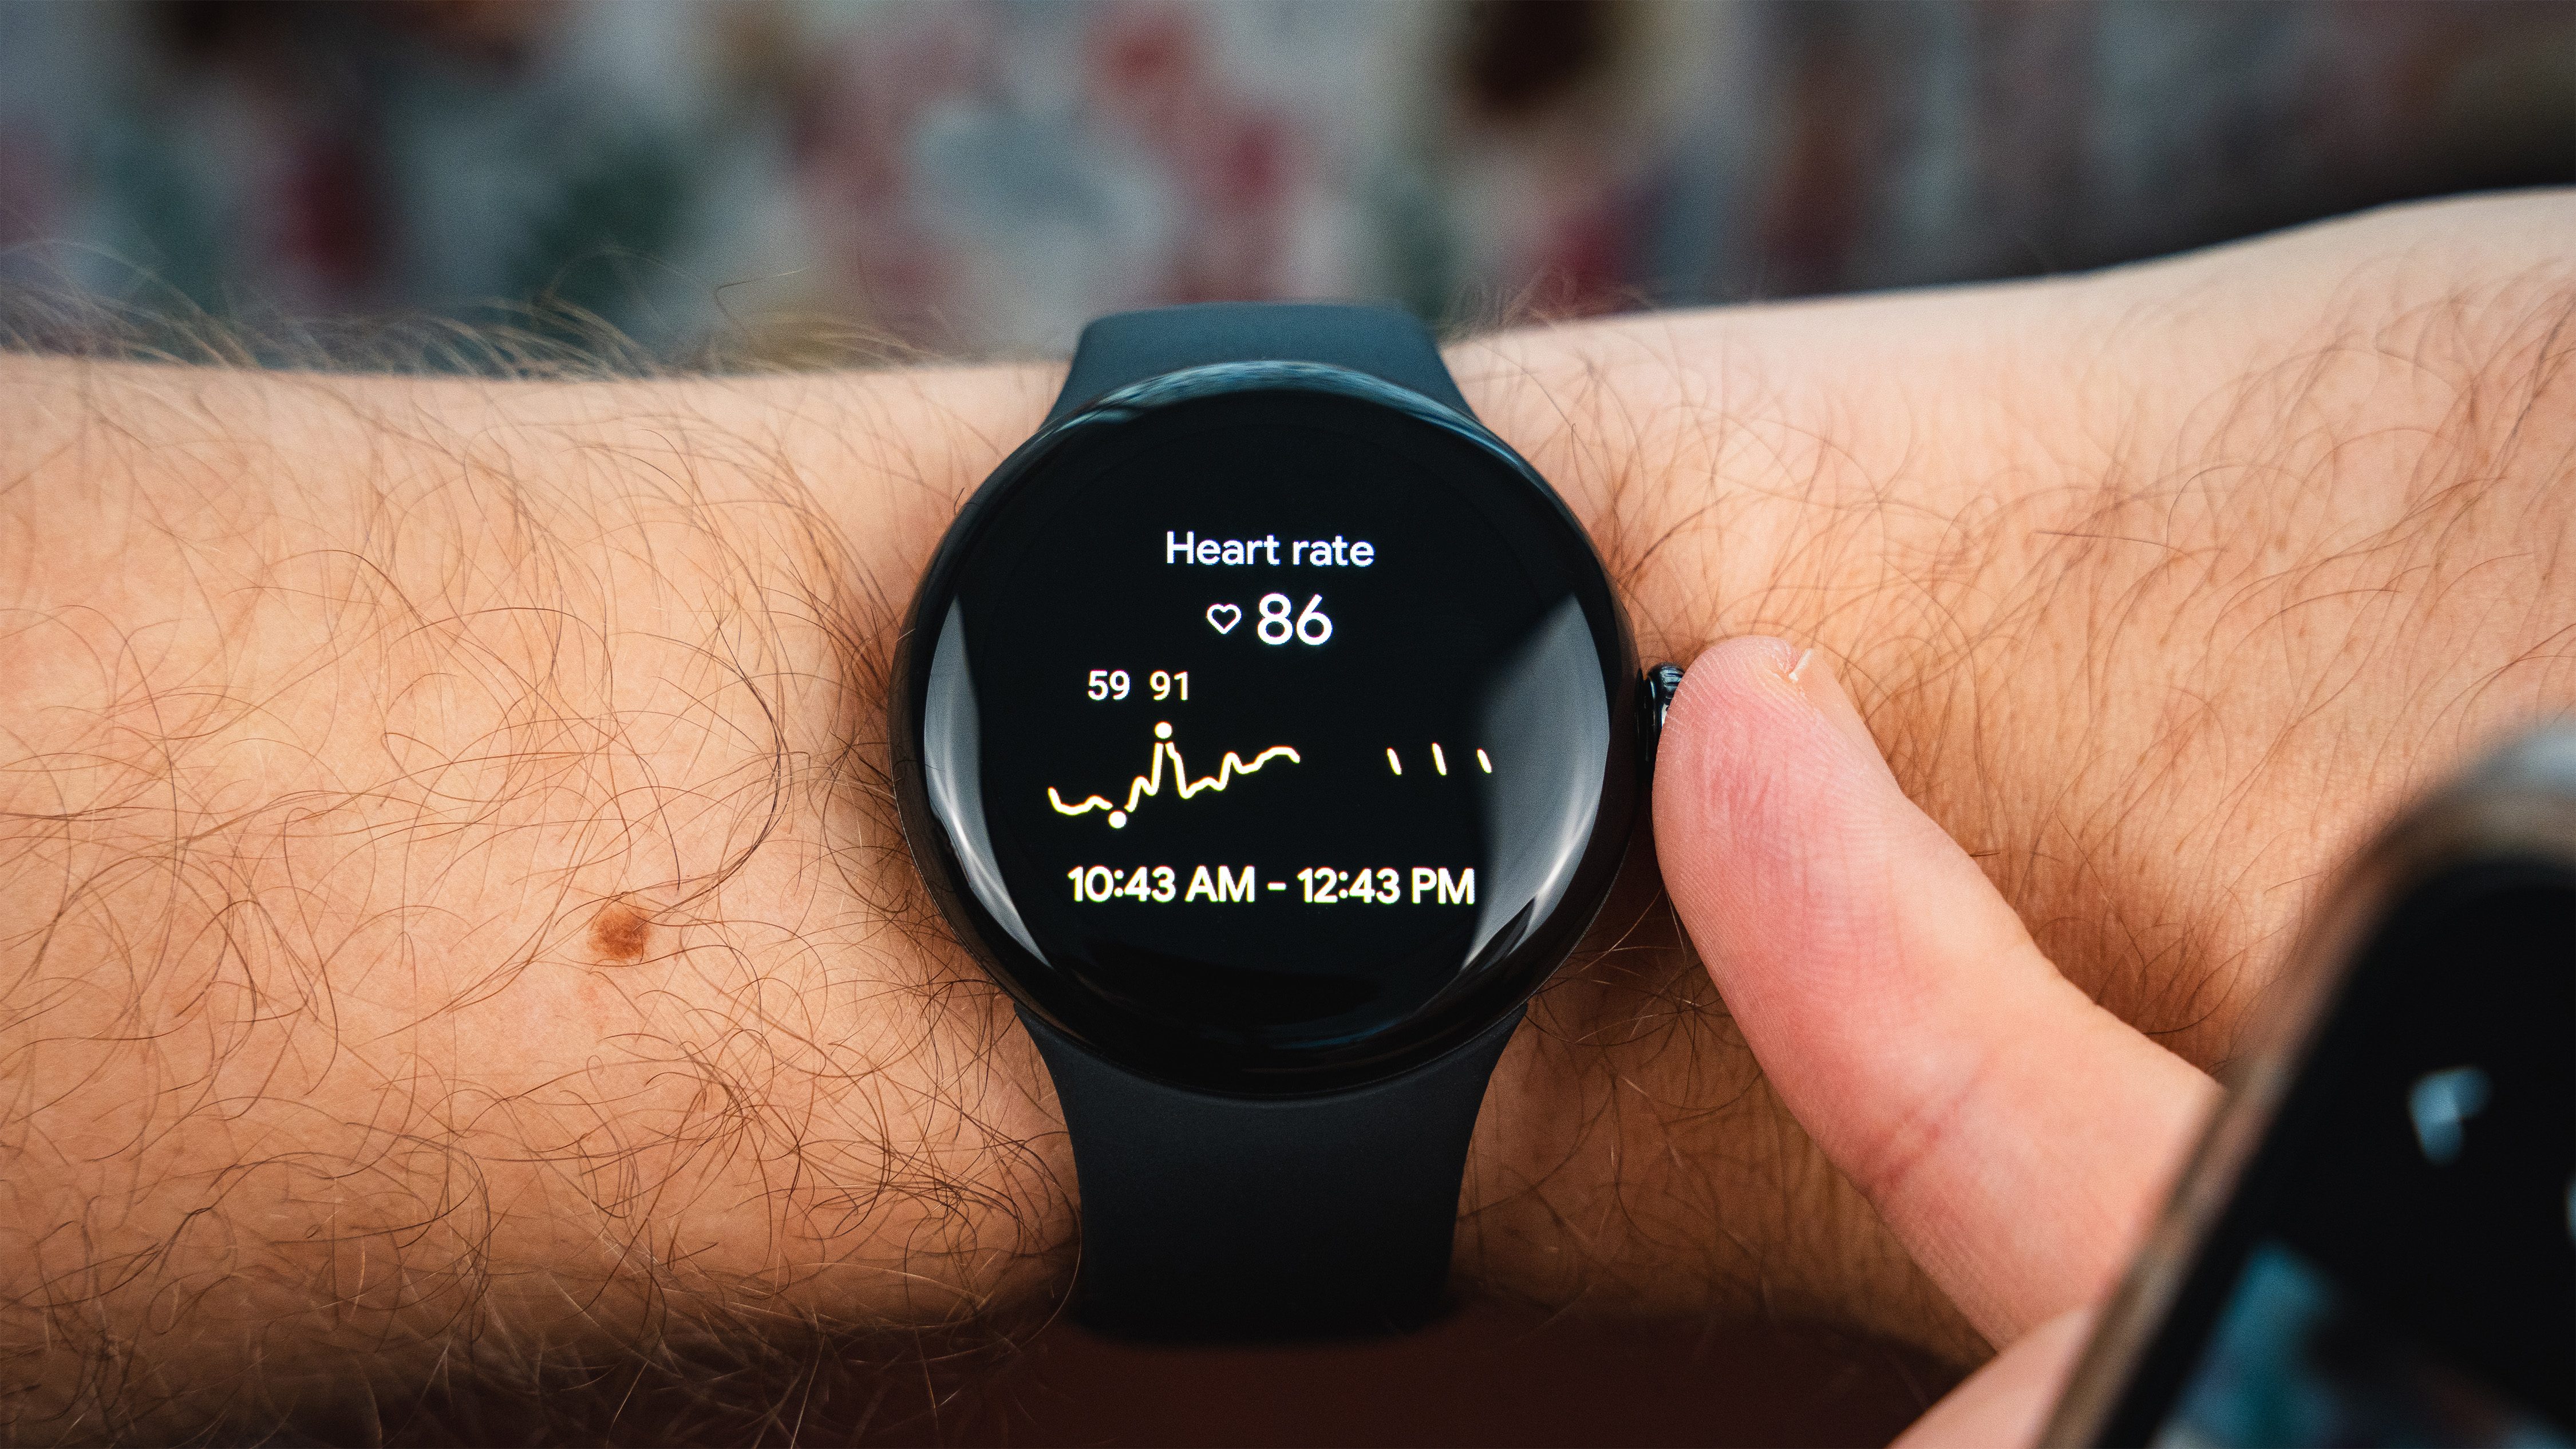 You paid too much for your Pixel Watch, and Google knows it | Digital Trends